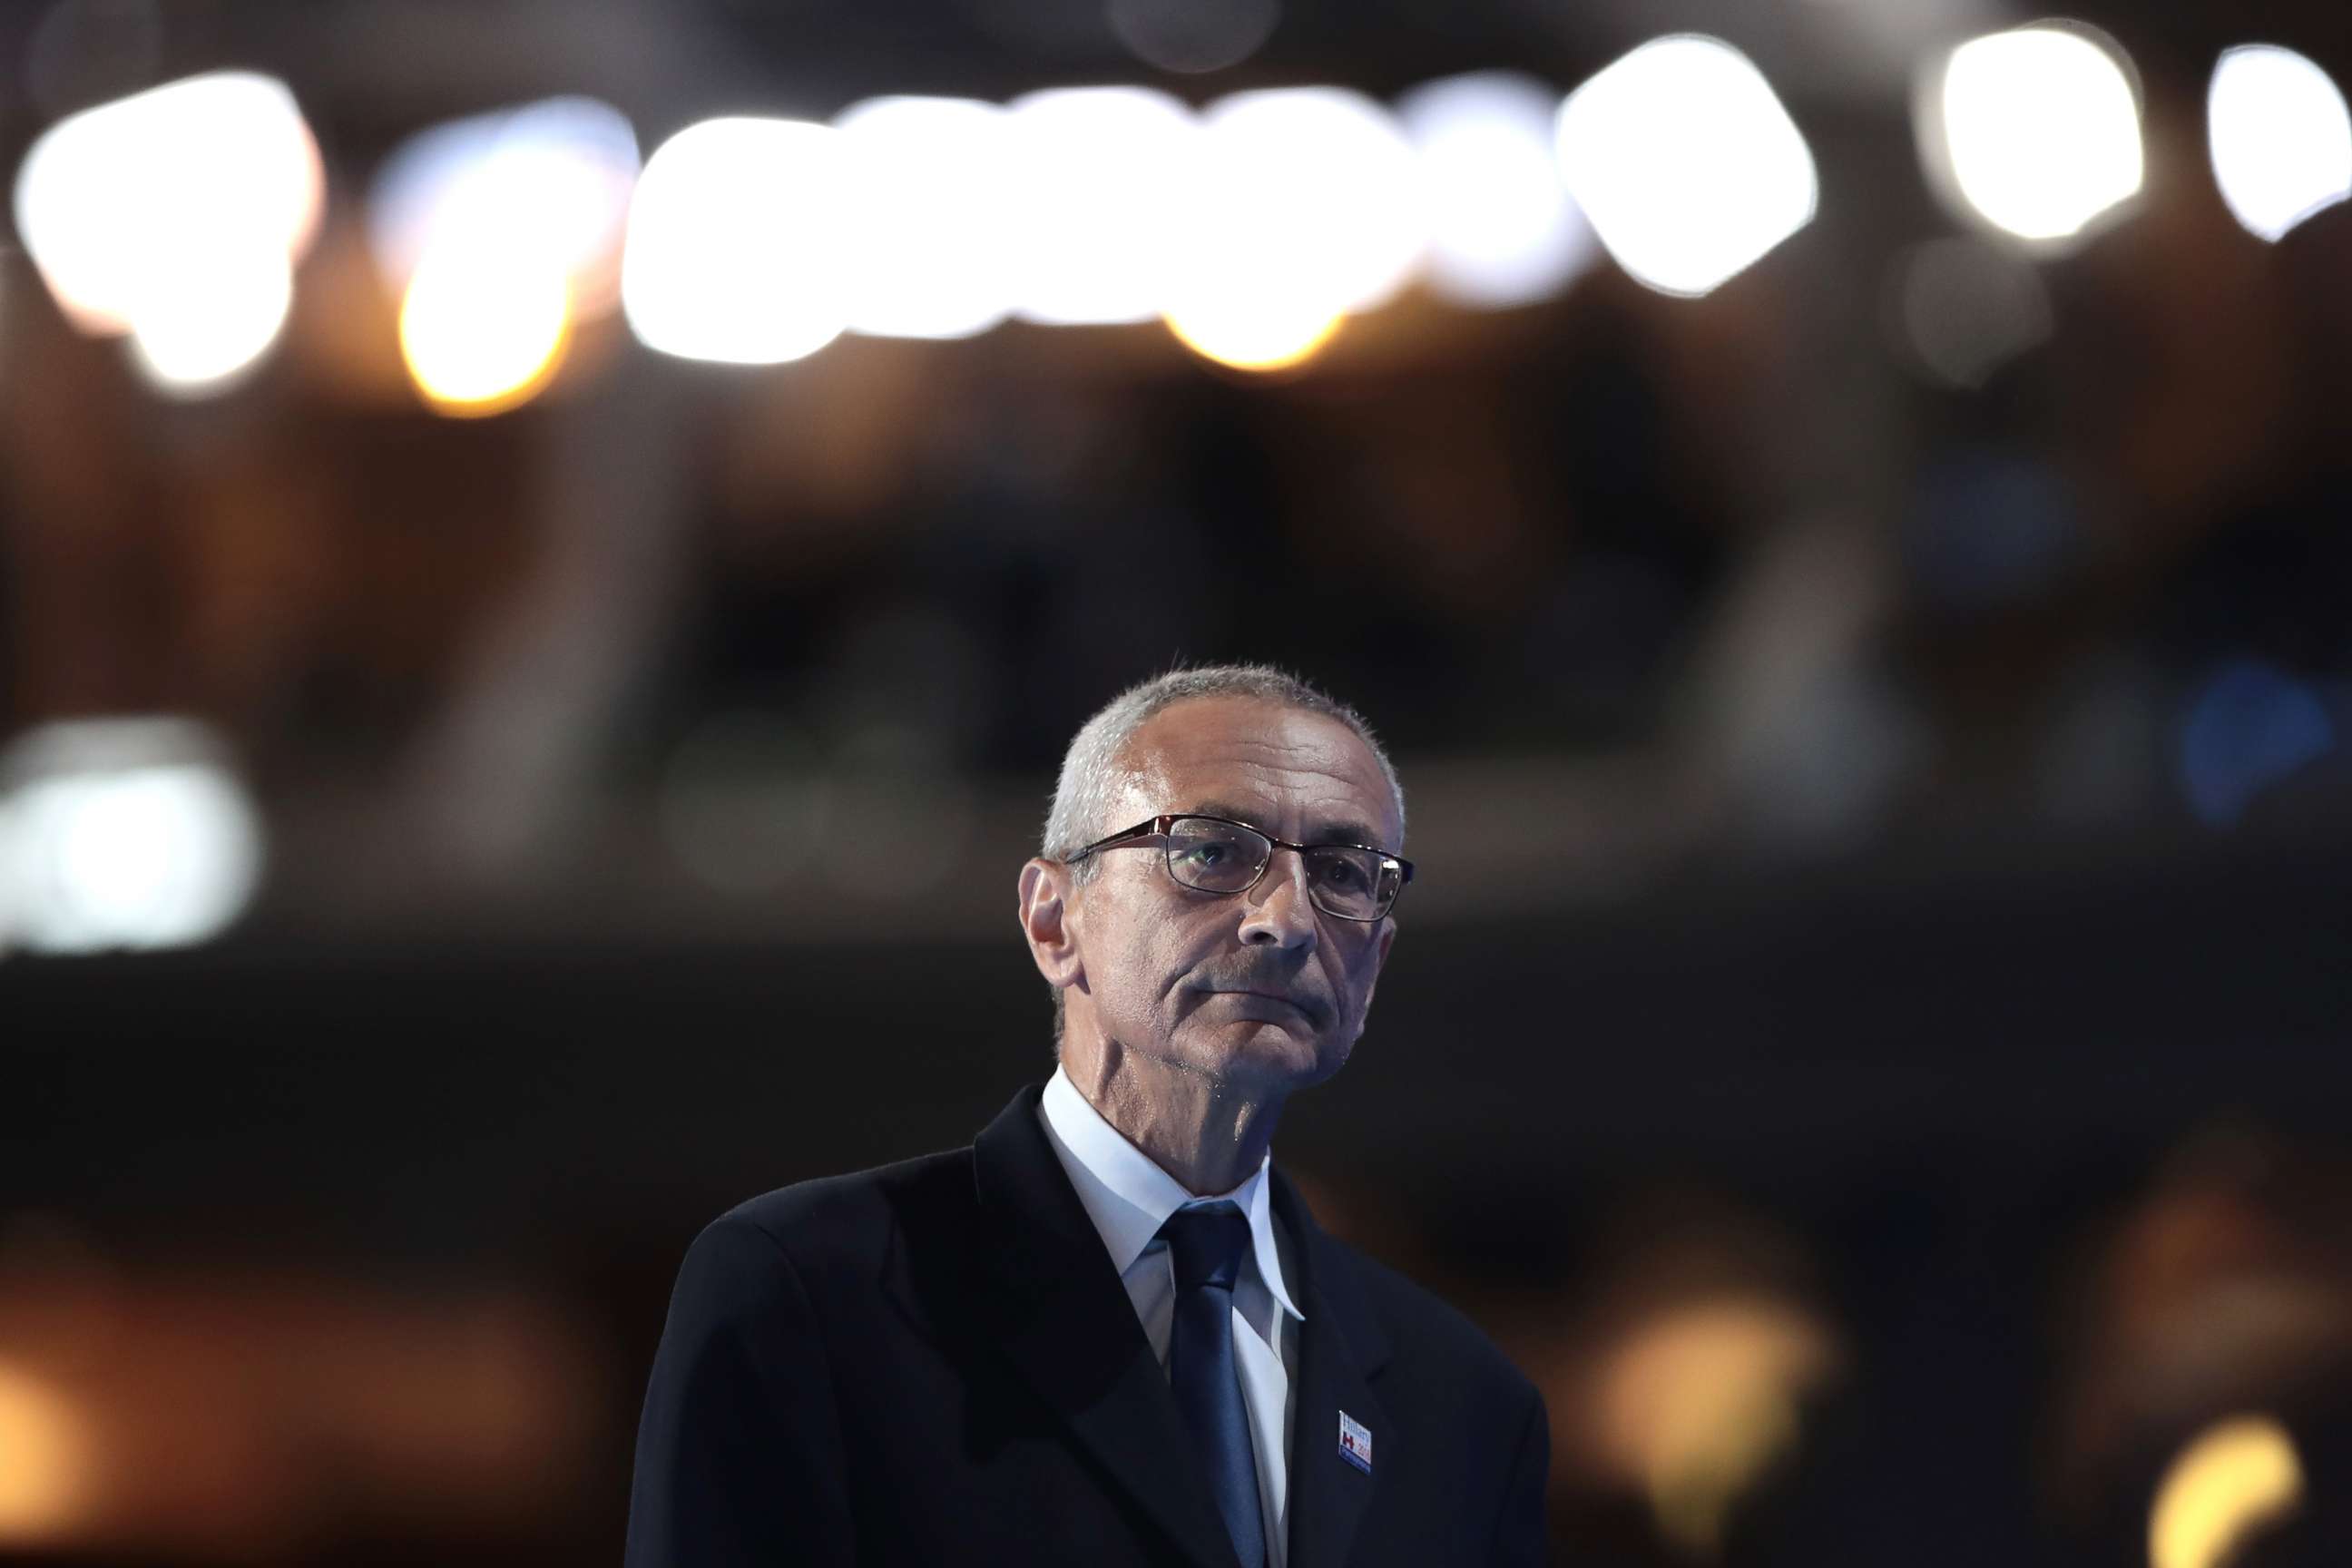 PHOTO: John Podesta, chair of the Hillary Clinton presidential campaign, walks off stage after delivering a speech on the first day of the Democratic National Convention at the Wells Fargo Center, July 25, 2016 in Philadelphia.